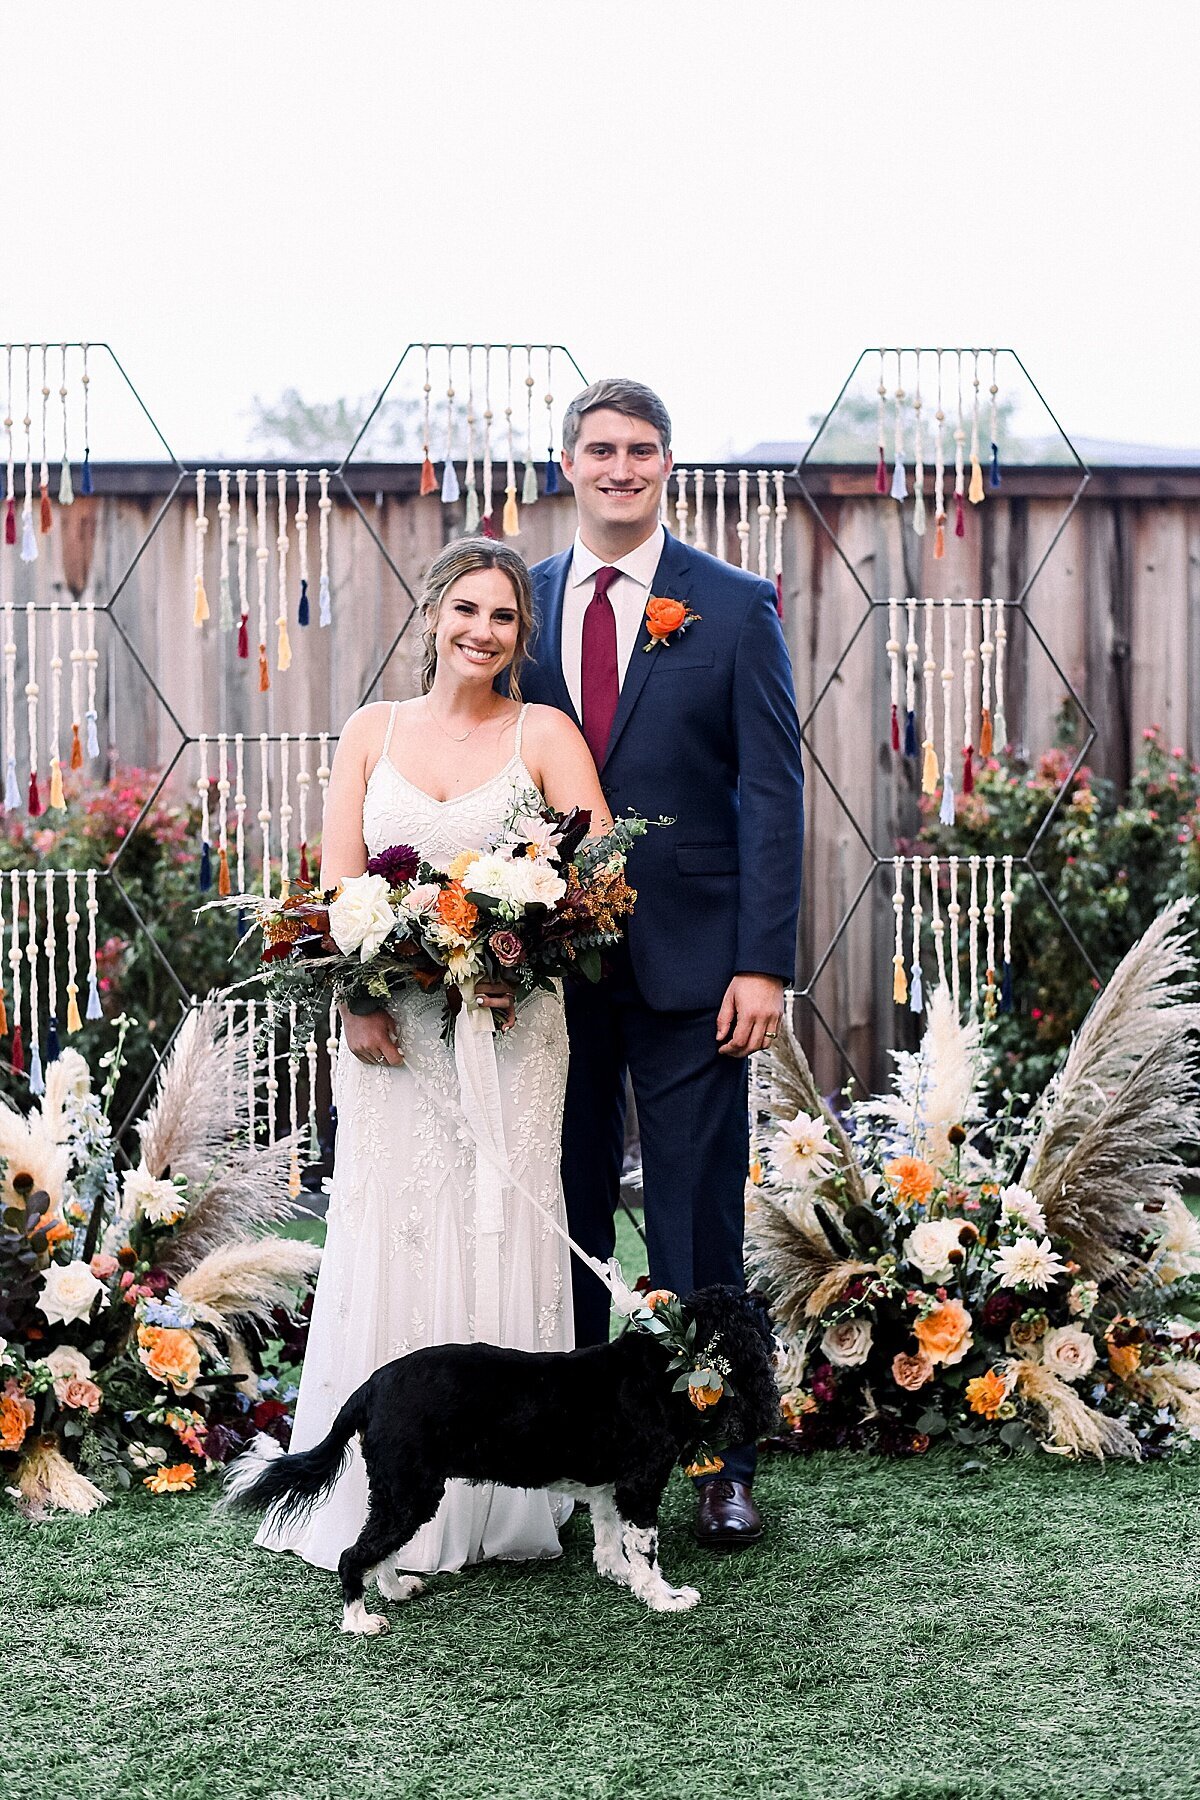 Wedding Ceremony with Unique Ceremony Backdrop with Florals by Vella Nest in Dallas Fort Worth